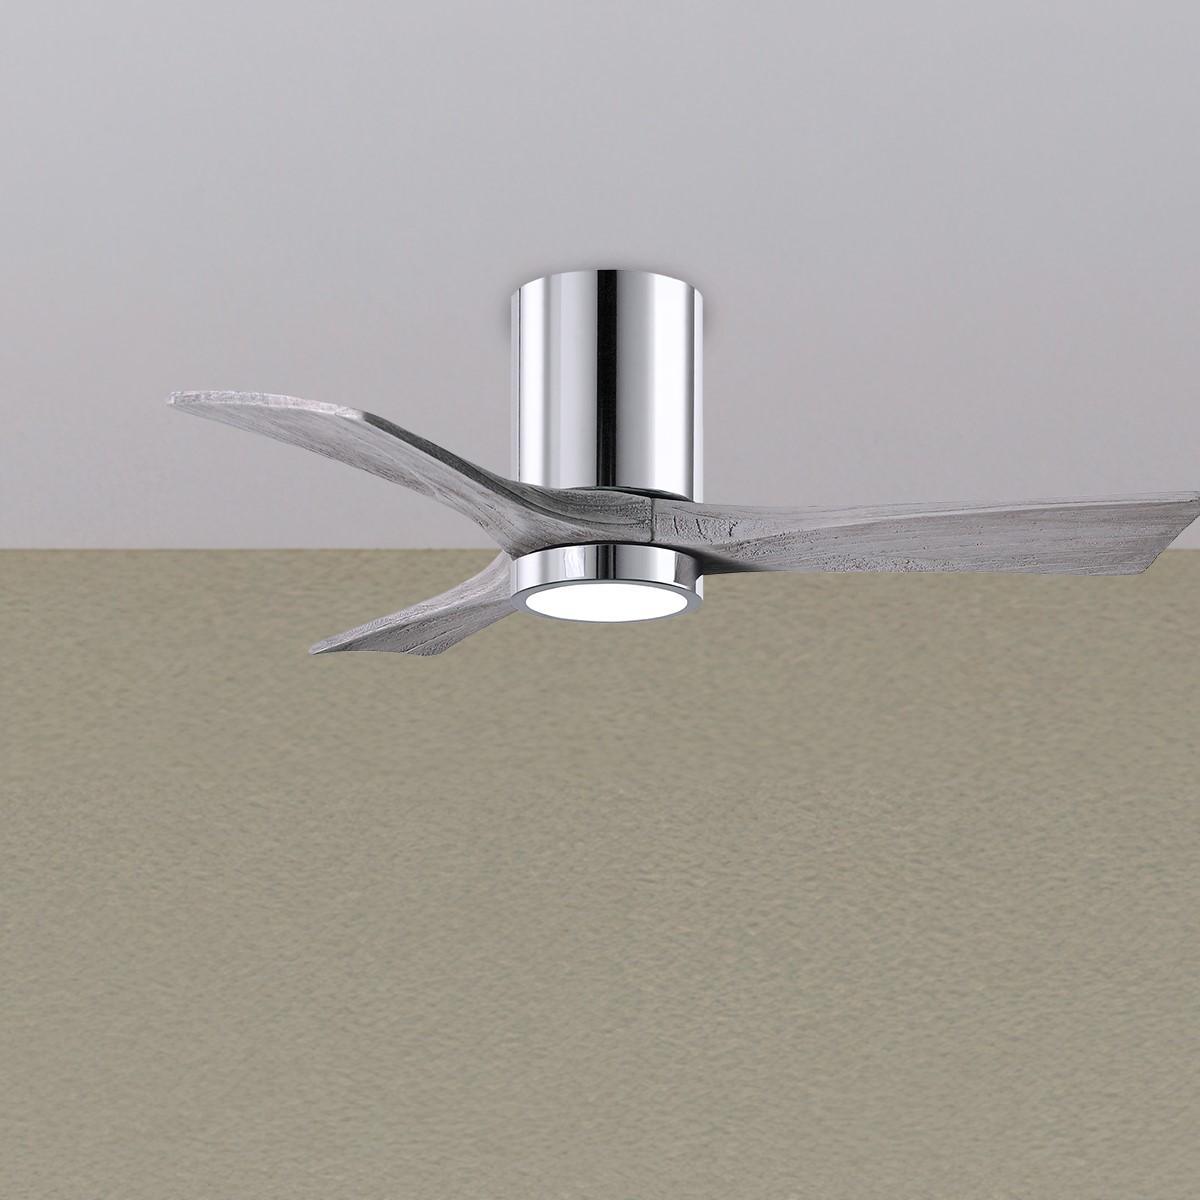 Irene 42 Inch Low Profile Outdoor Ceiling Fan With Light, Wall And Remote Control Included